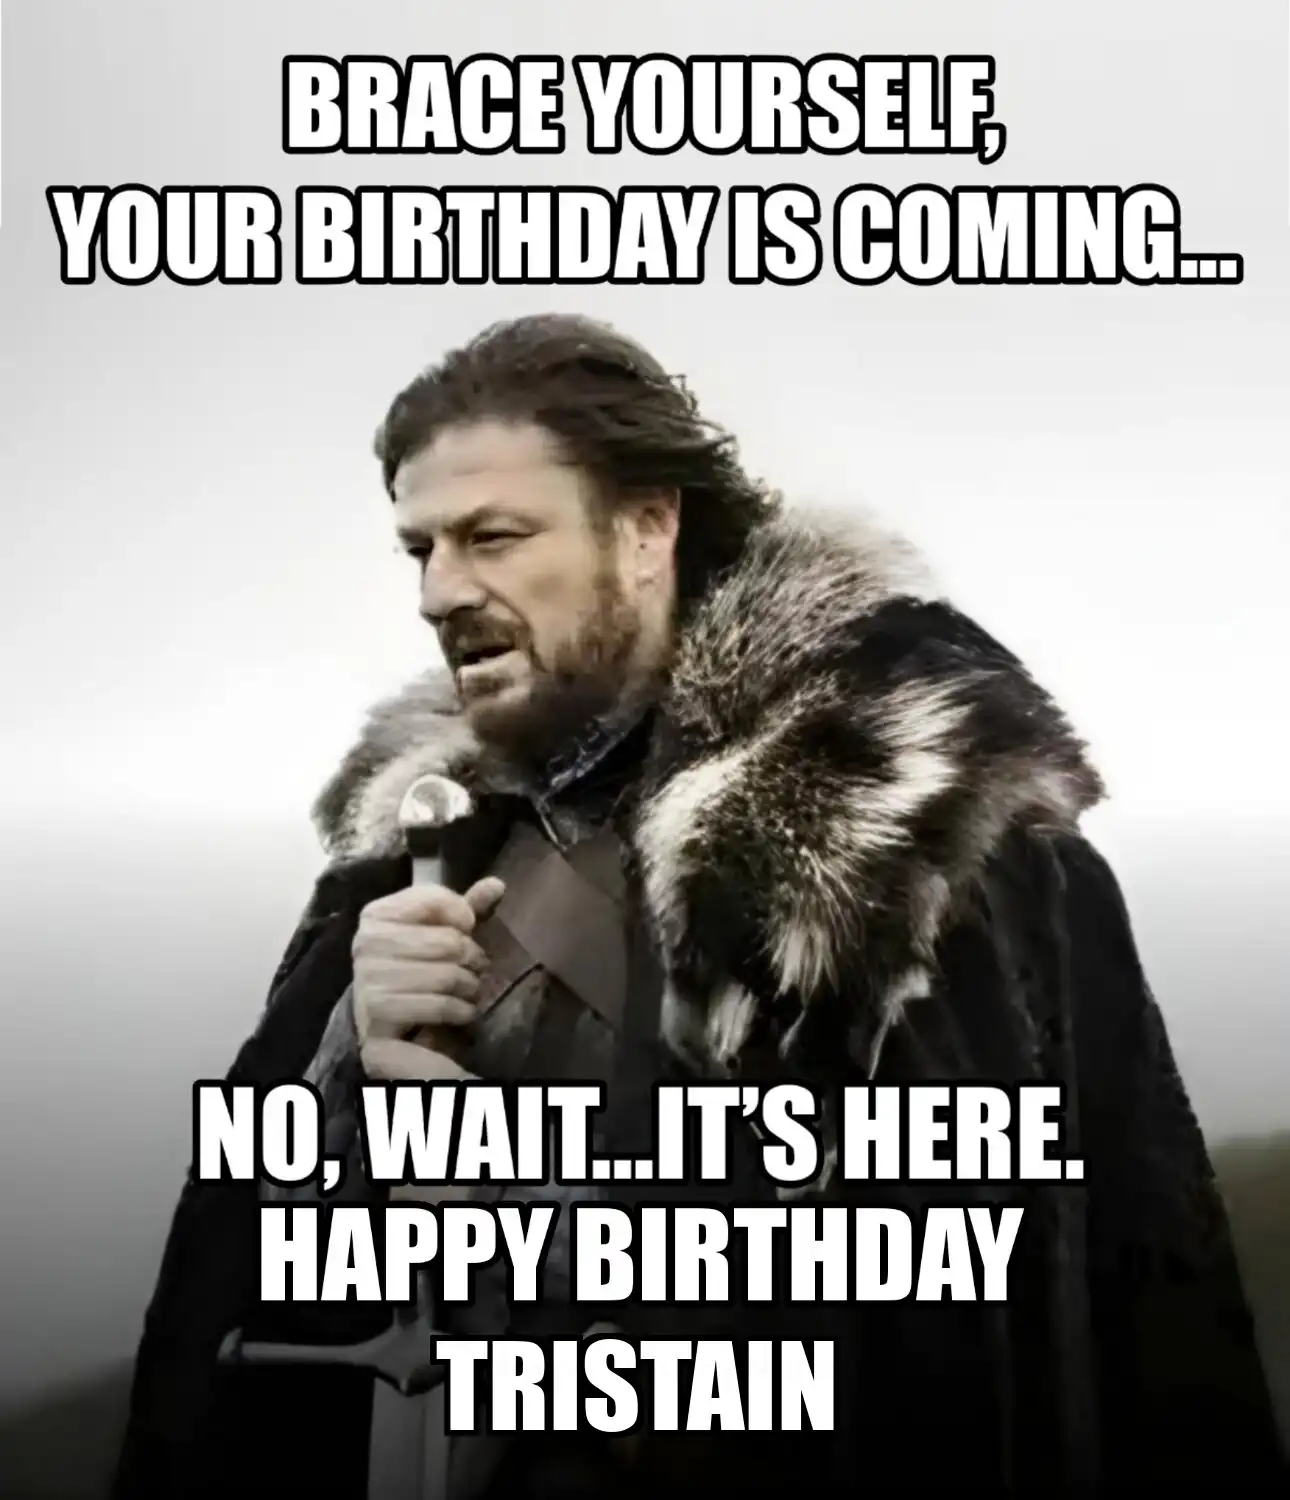 Happy Birthday Tristain Brace Yourself Your Birthday Is Coming Meme